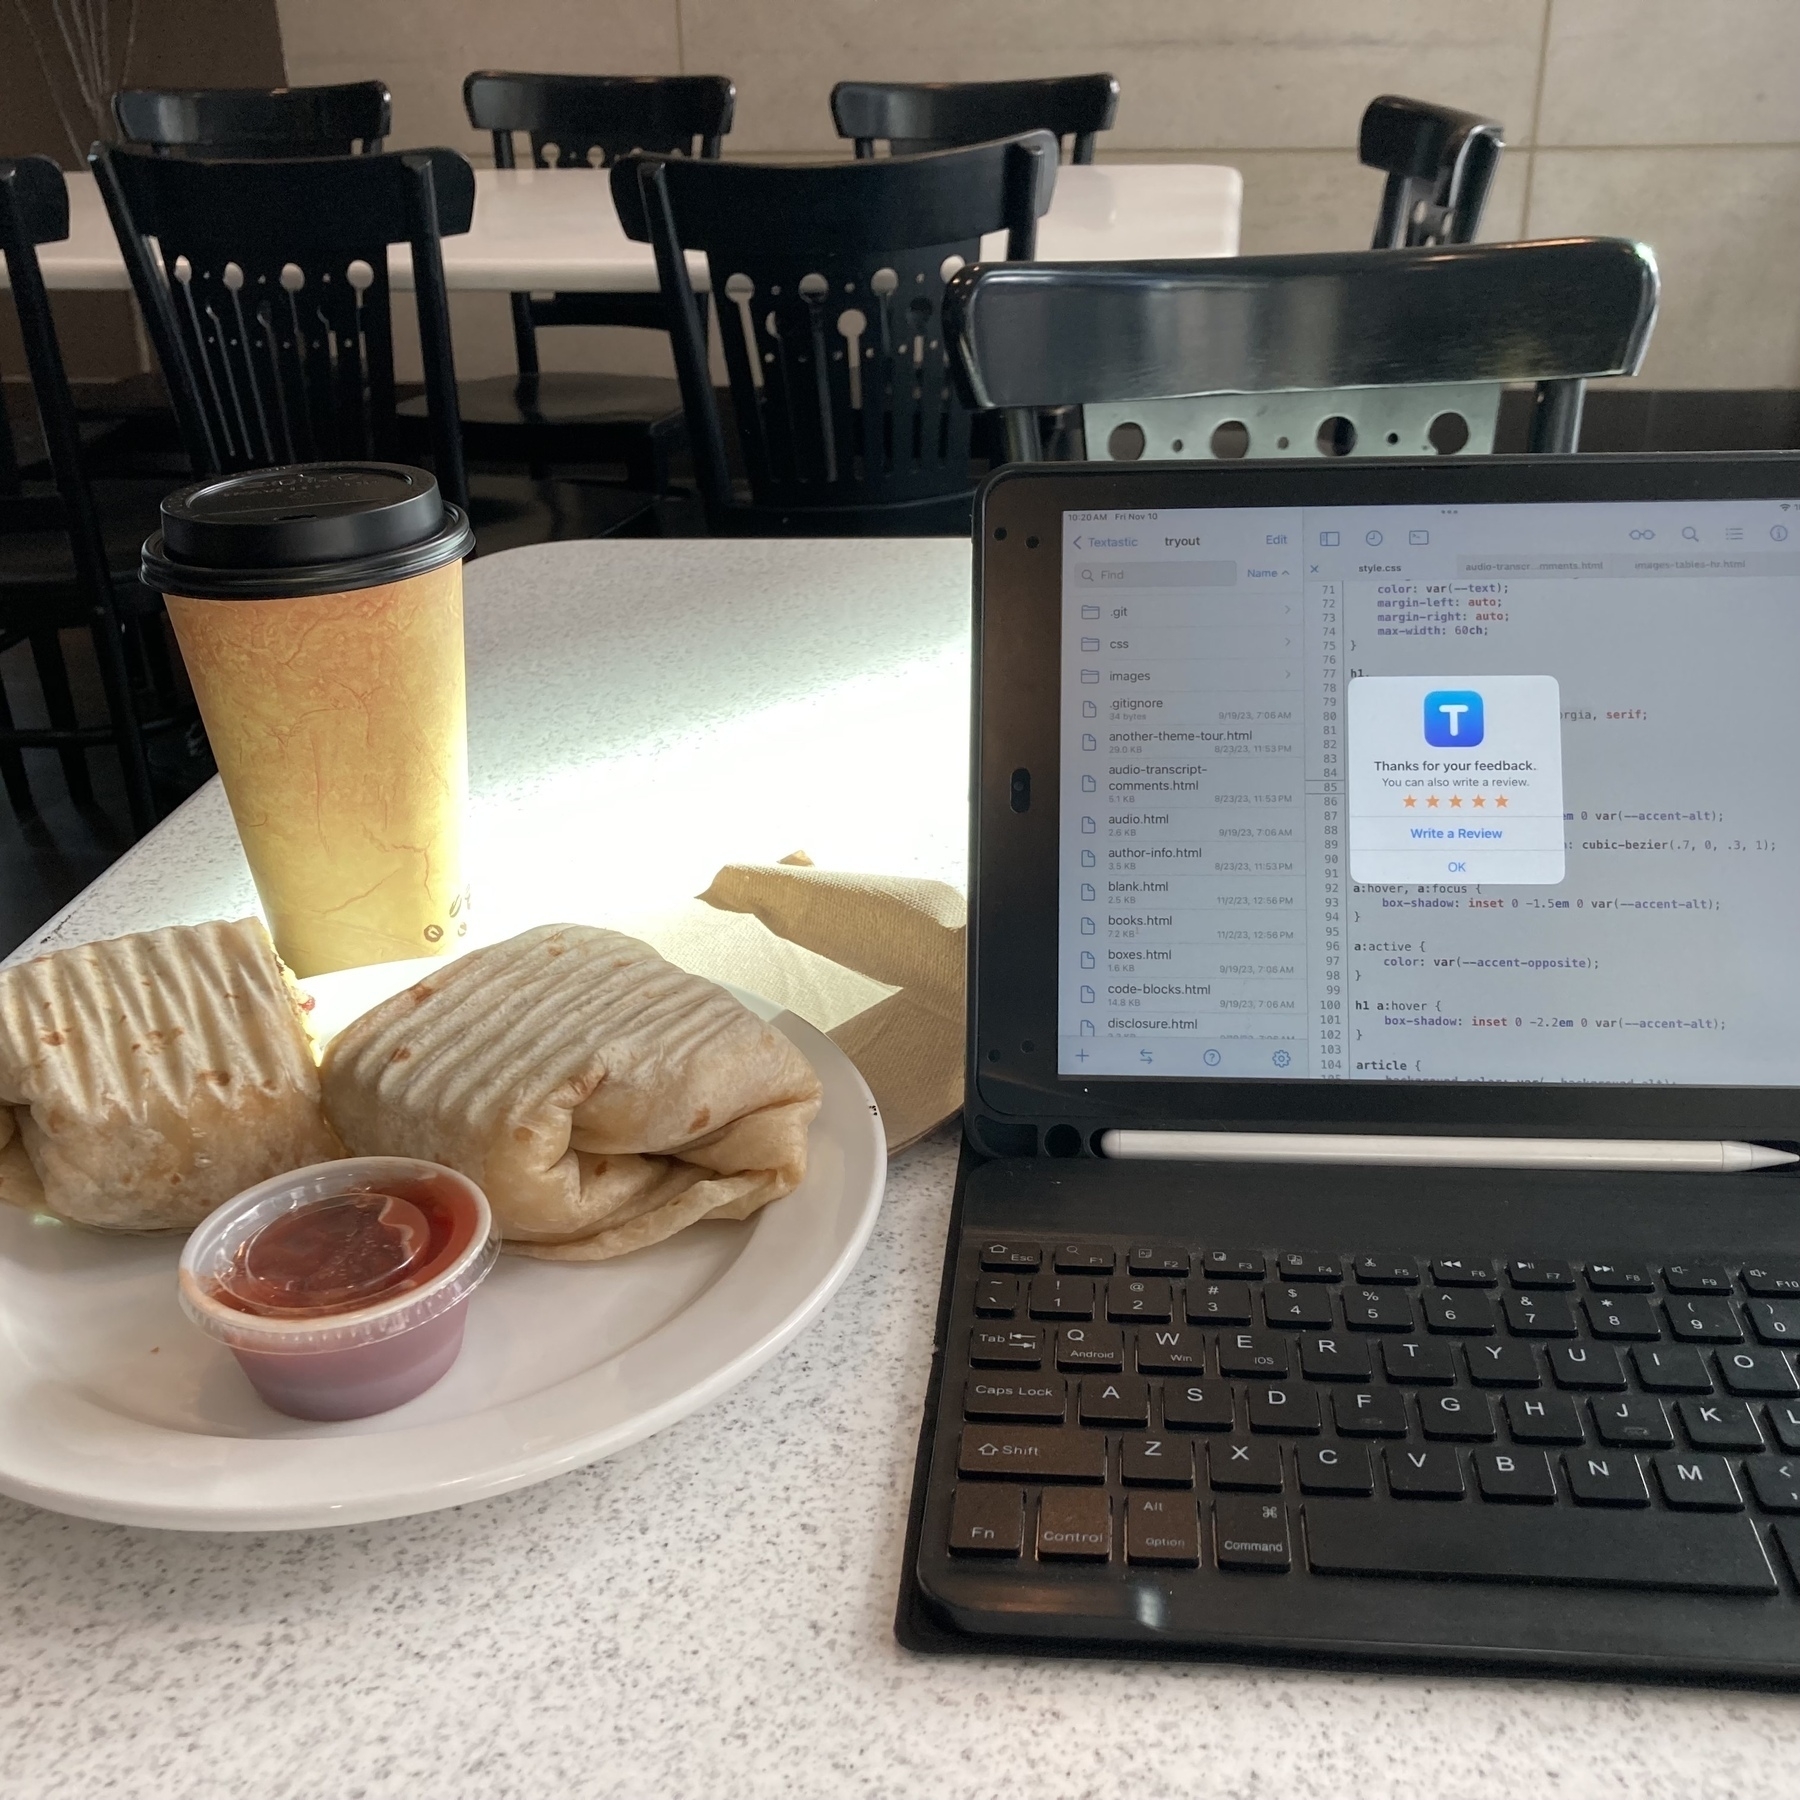 Breakfast burrito, coffee, and an iPad on a small table. 